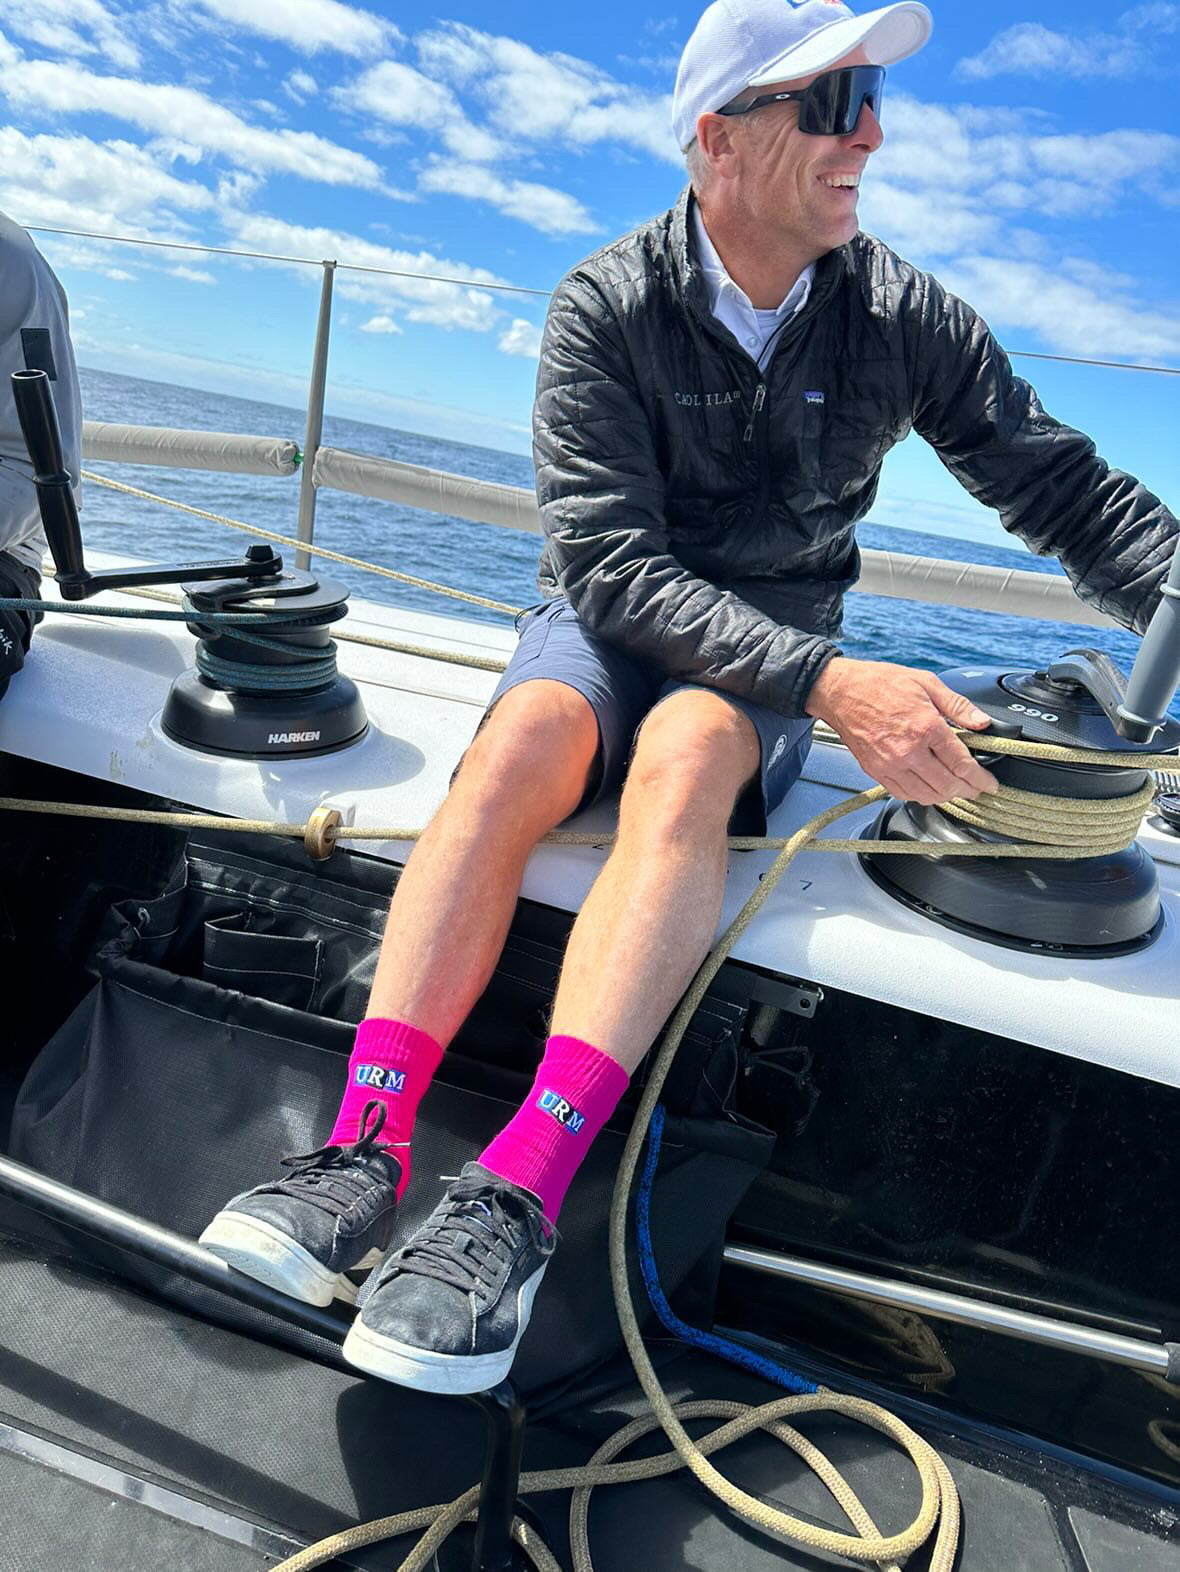 URM GRoup co branding with PInk Dry Socks in partnership with Femme Soleil by Rachel sailing team